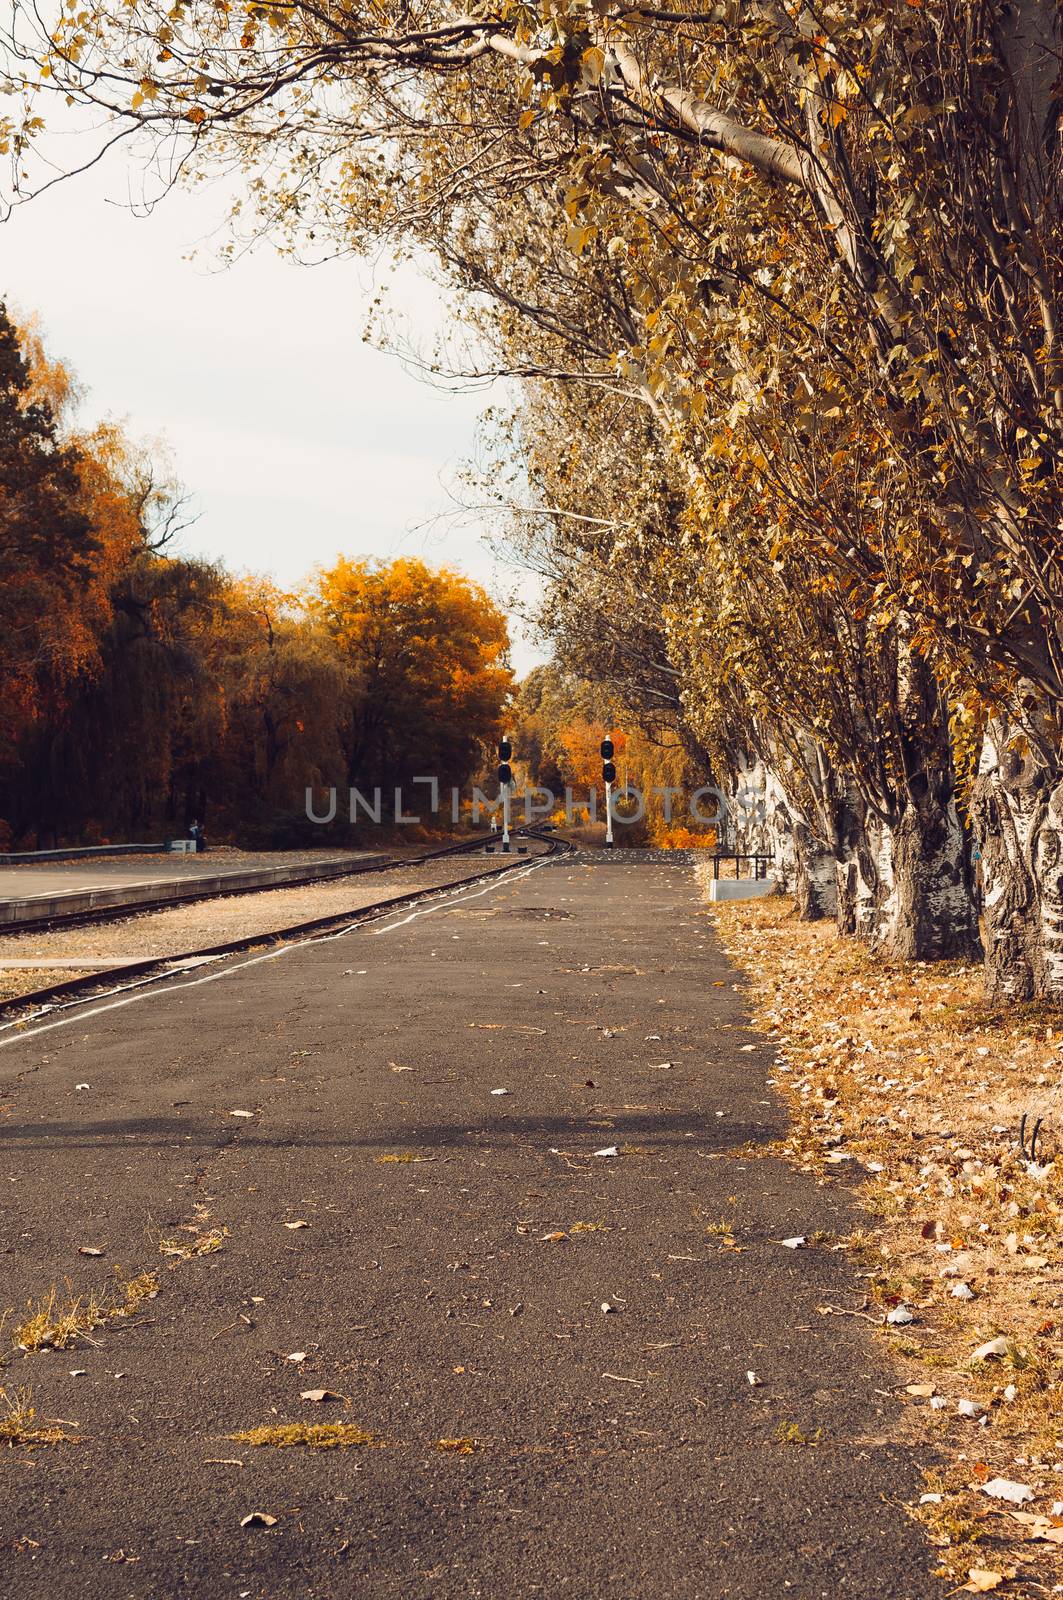 Autumn sunny landscape. A road in an autumn park with trees and fallen yellow leaves on the ground on a sunny October day. Template for design.